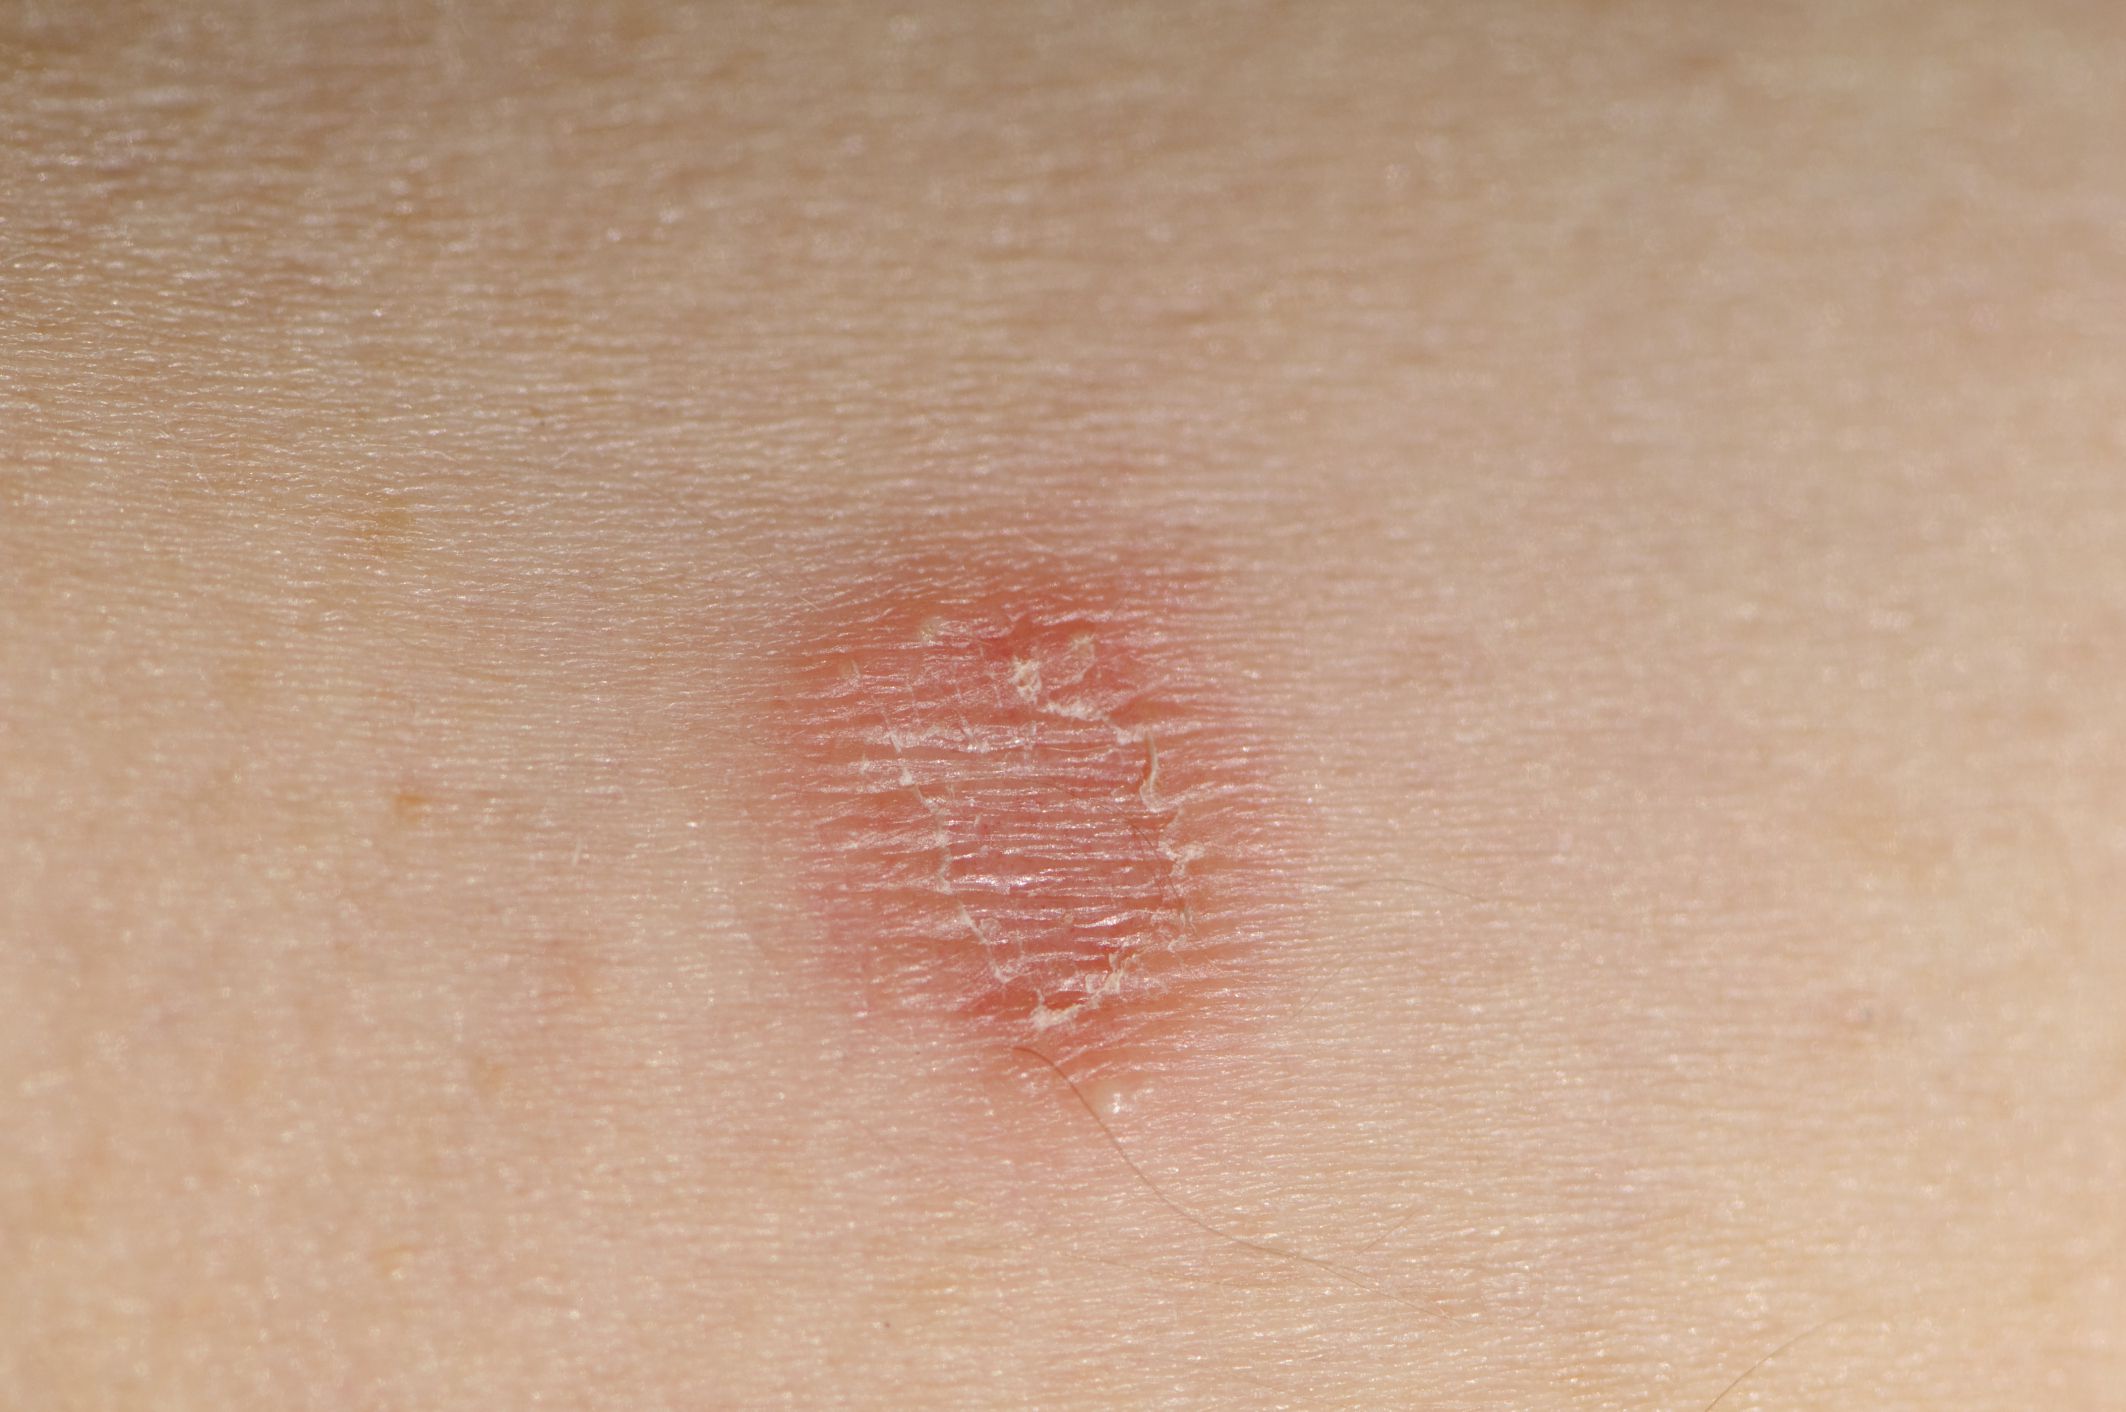 Causes, Symptoms and Treatment of Ringworm